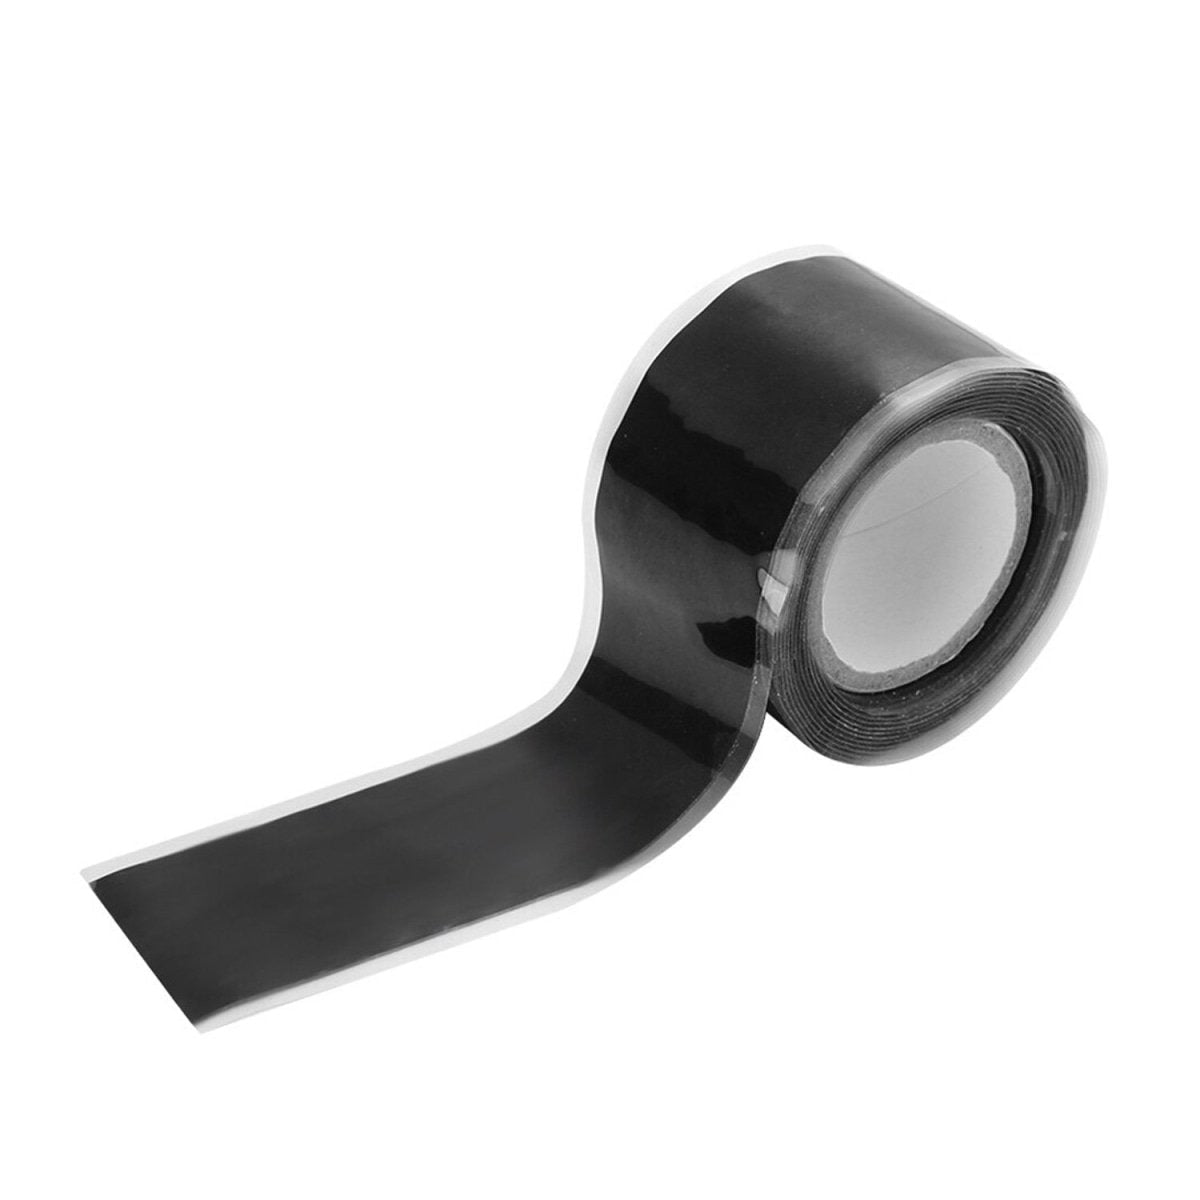 Multi-Purpose Silicone Adhesive Tape Strong Black Silicon Rubber Waterproof Bond Tools